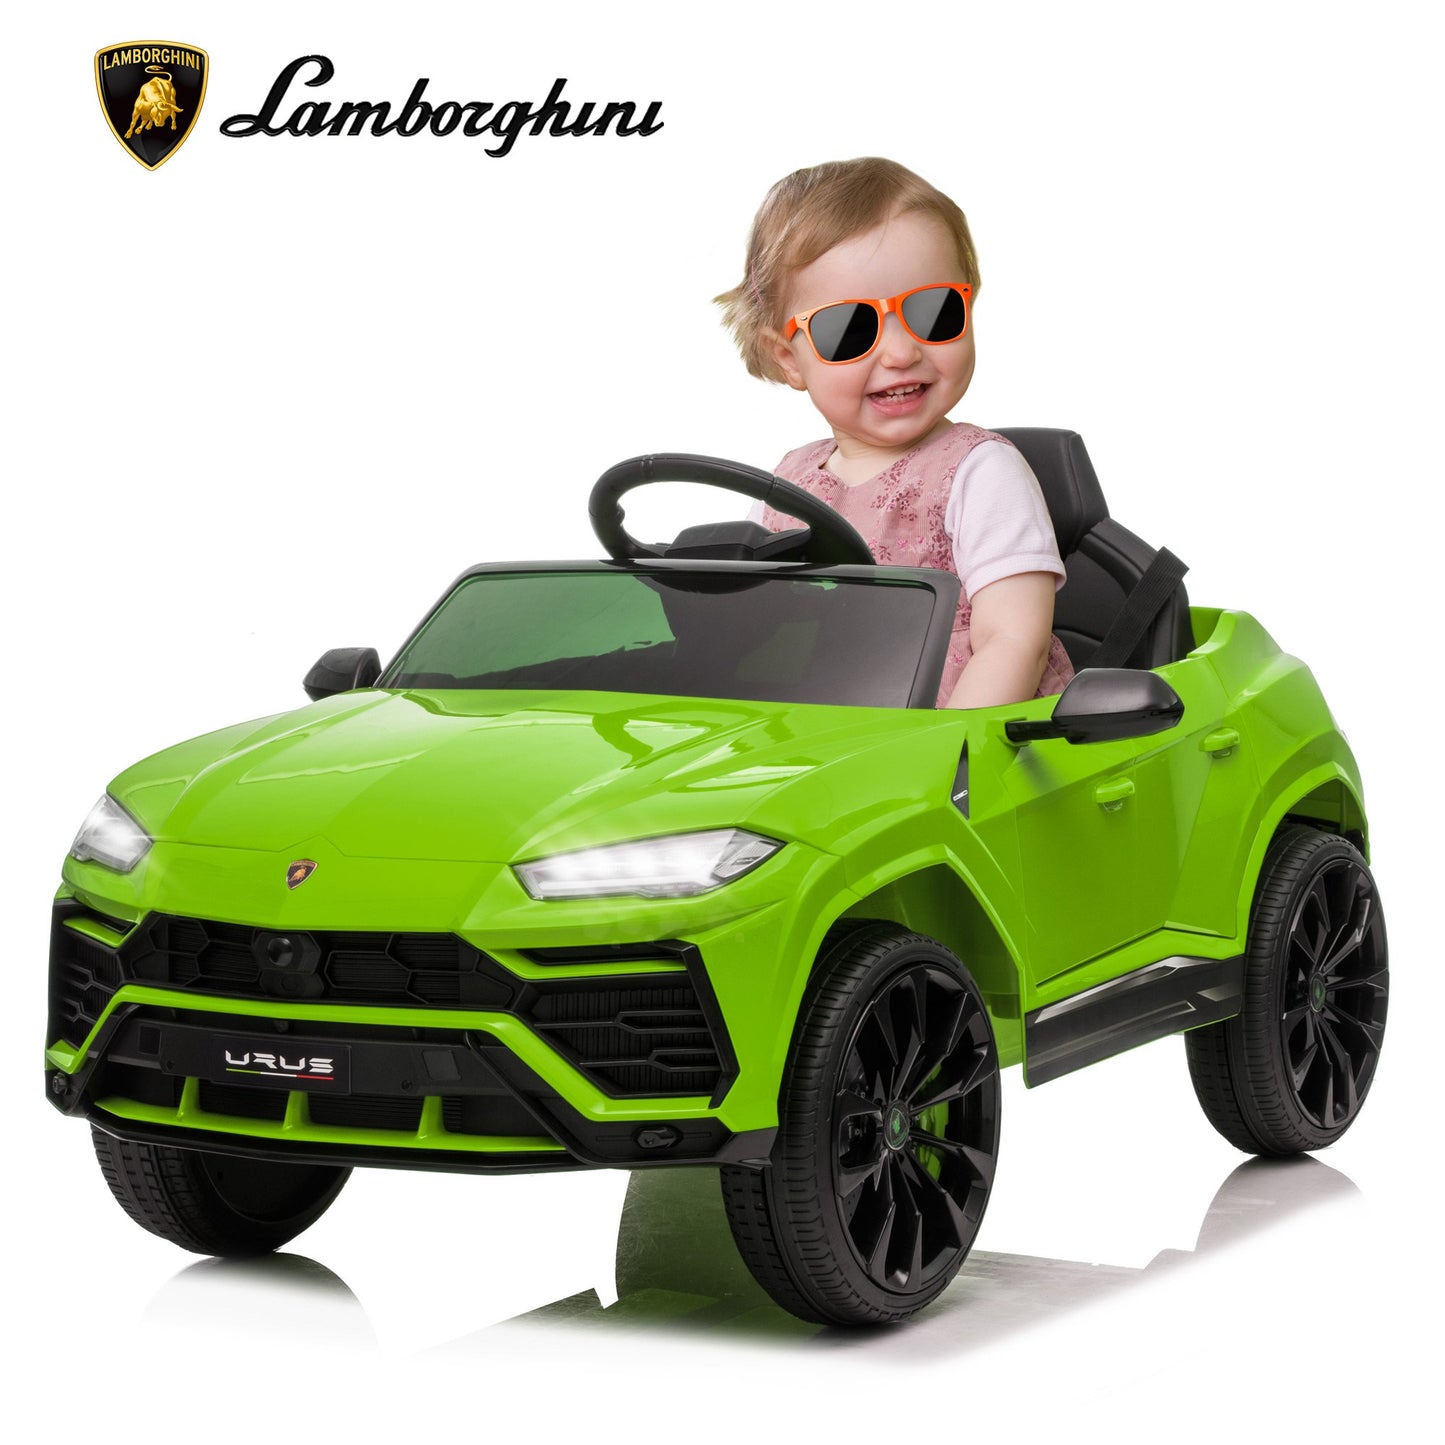 SYNGAR Battery Operated Car Toy for Kids, Licensed Lamborghini Ride on Cars with Remote Control, 3 Speeds, LED Lights, Player, Horn, Electric Vehicle Kids Party Gift, Green